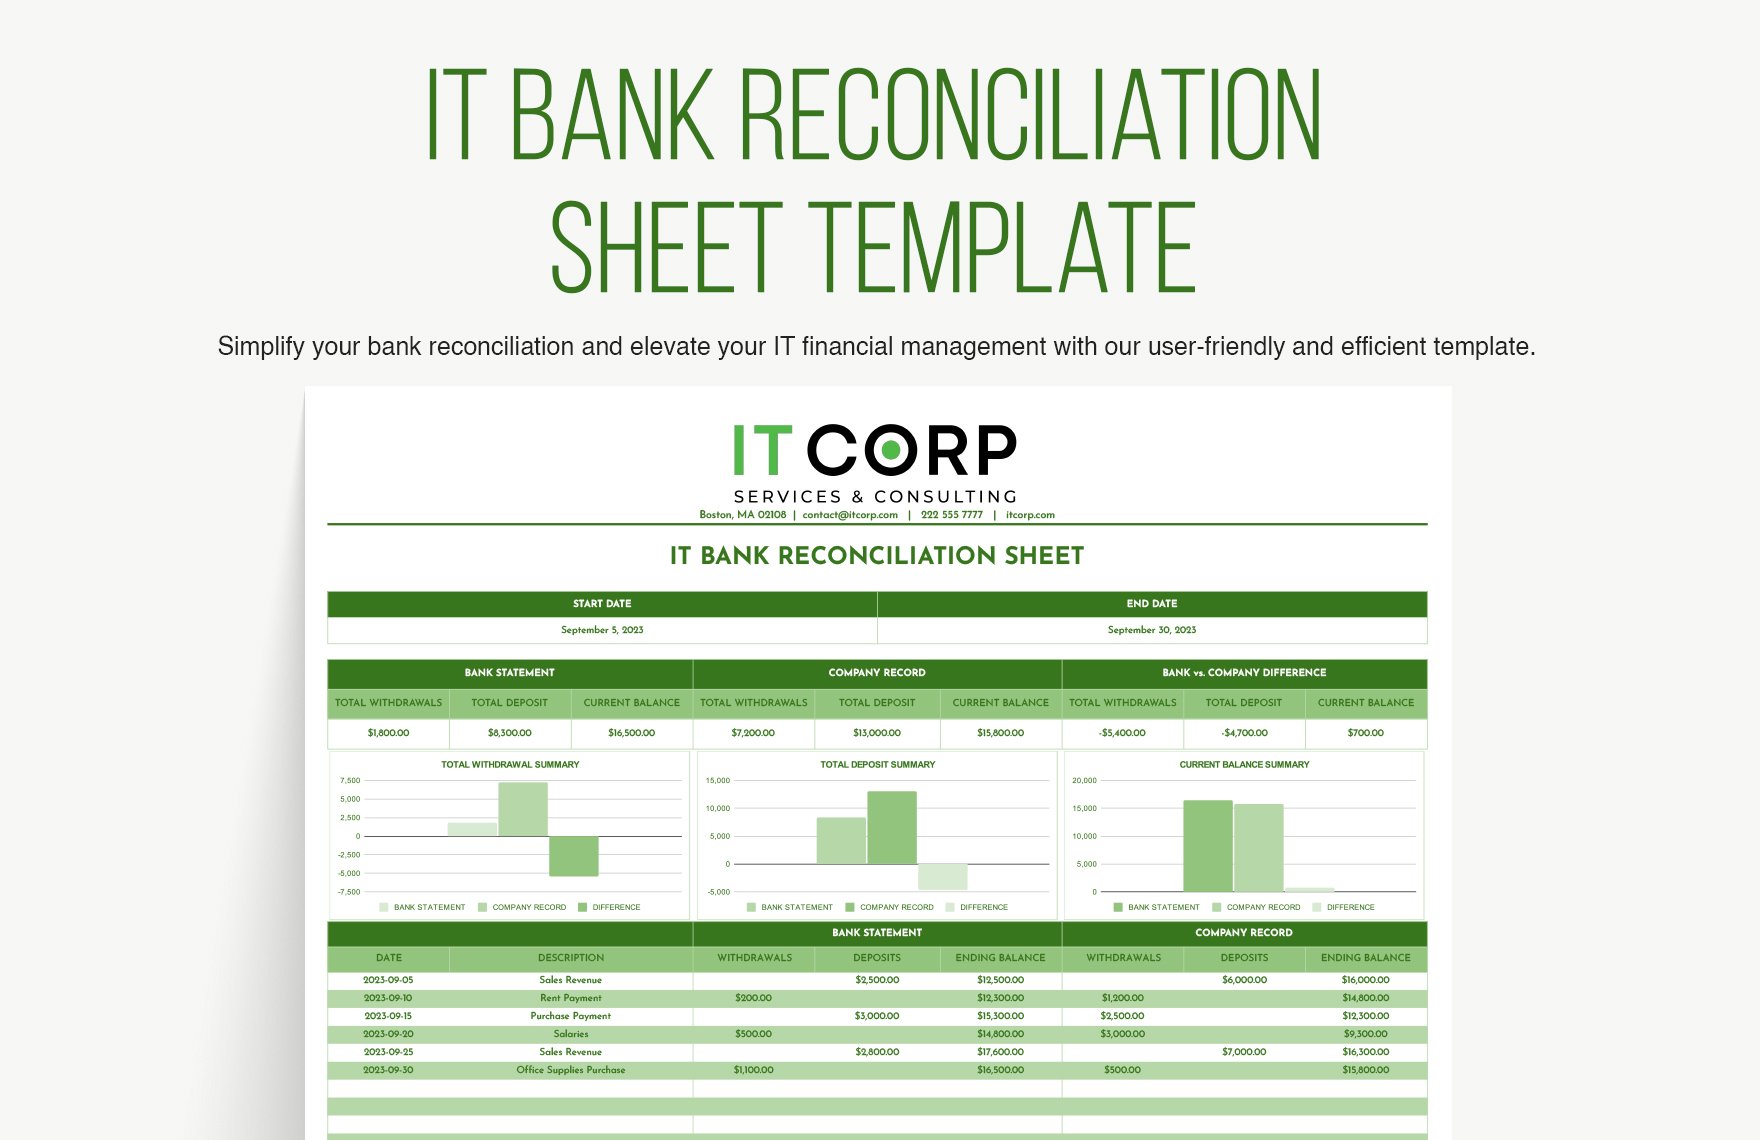 IT Bank Reconciliation Sheet Template in Excel, Google Sheets